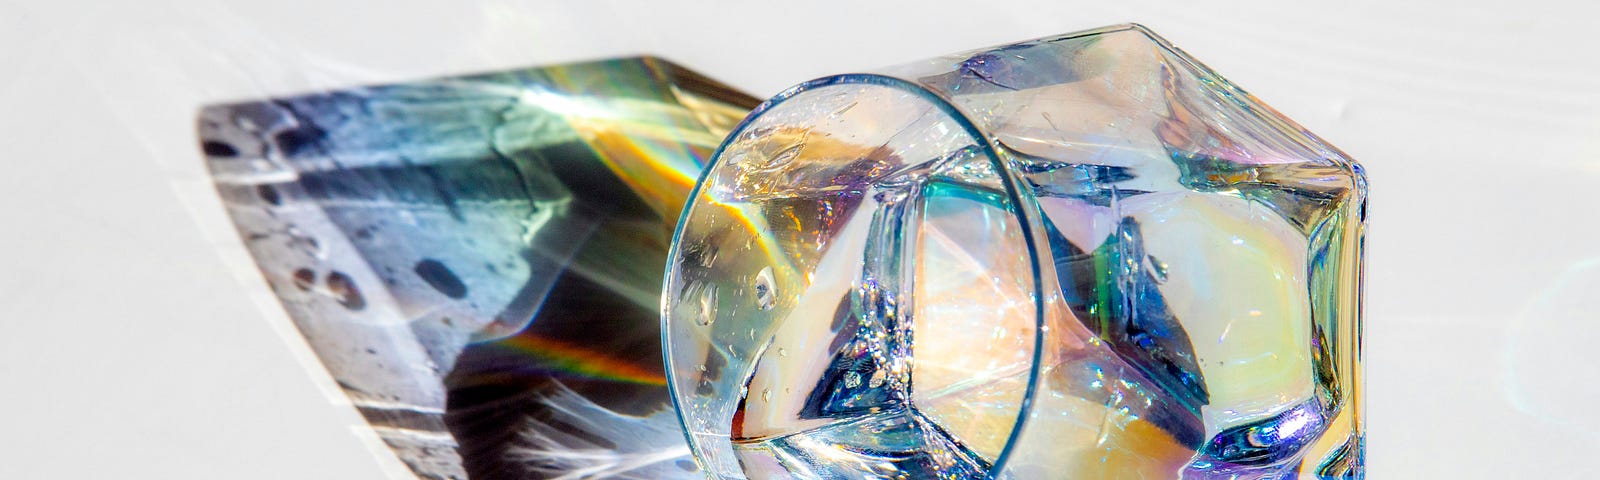 a glass jewel reflecting multiple colors